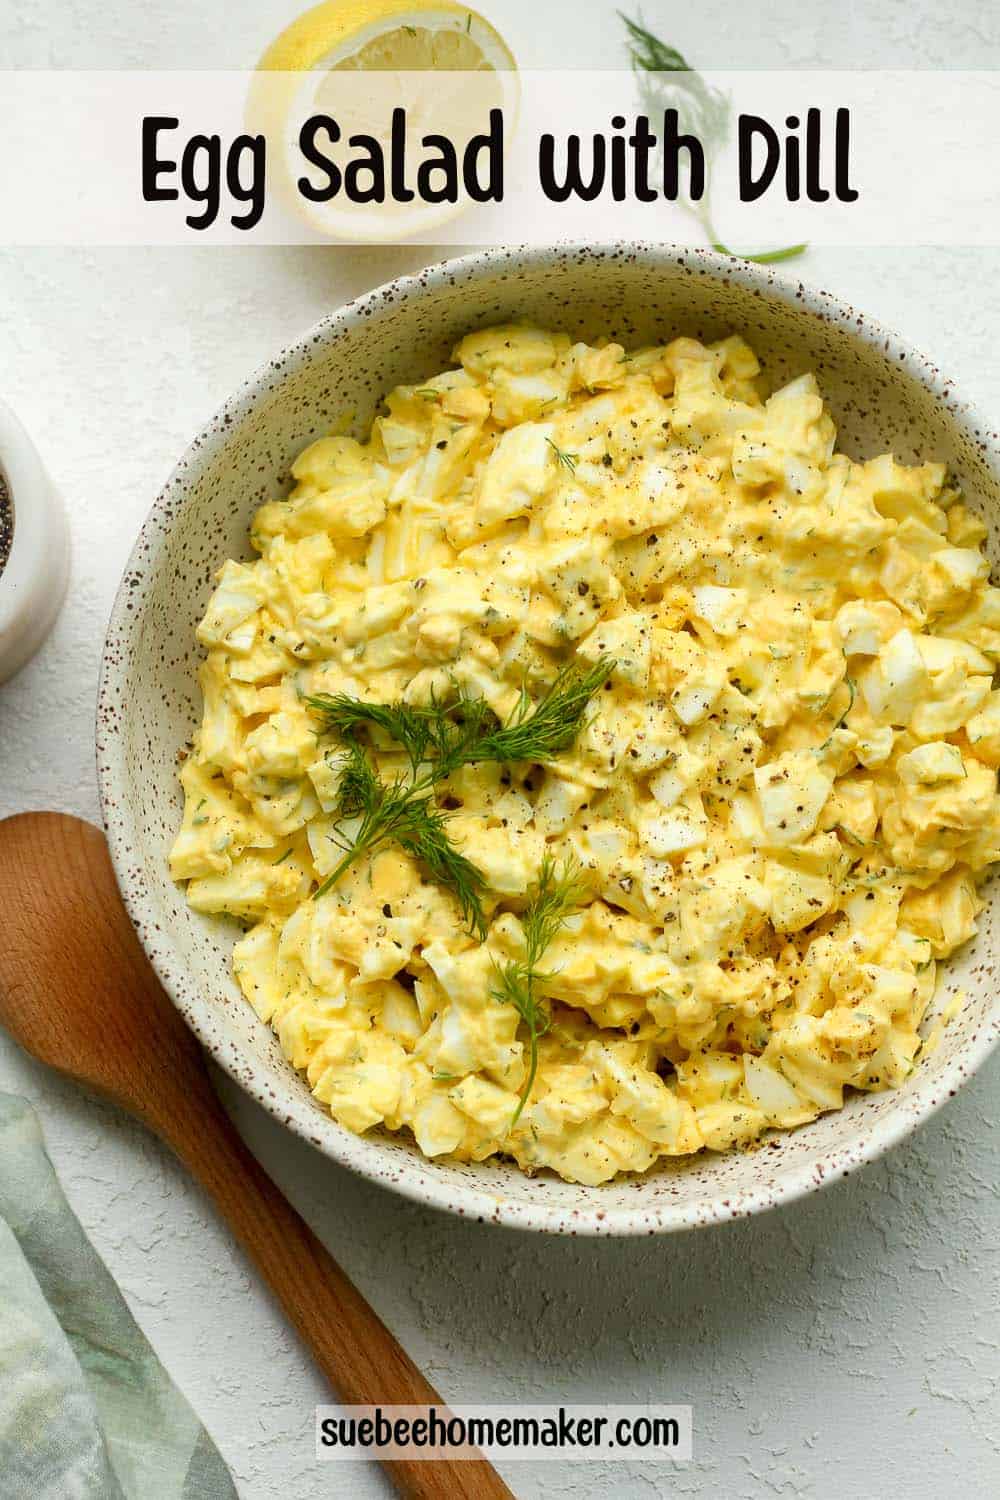 A bowl of egg salad with dill.